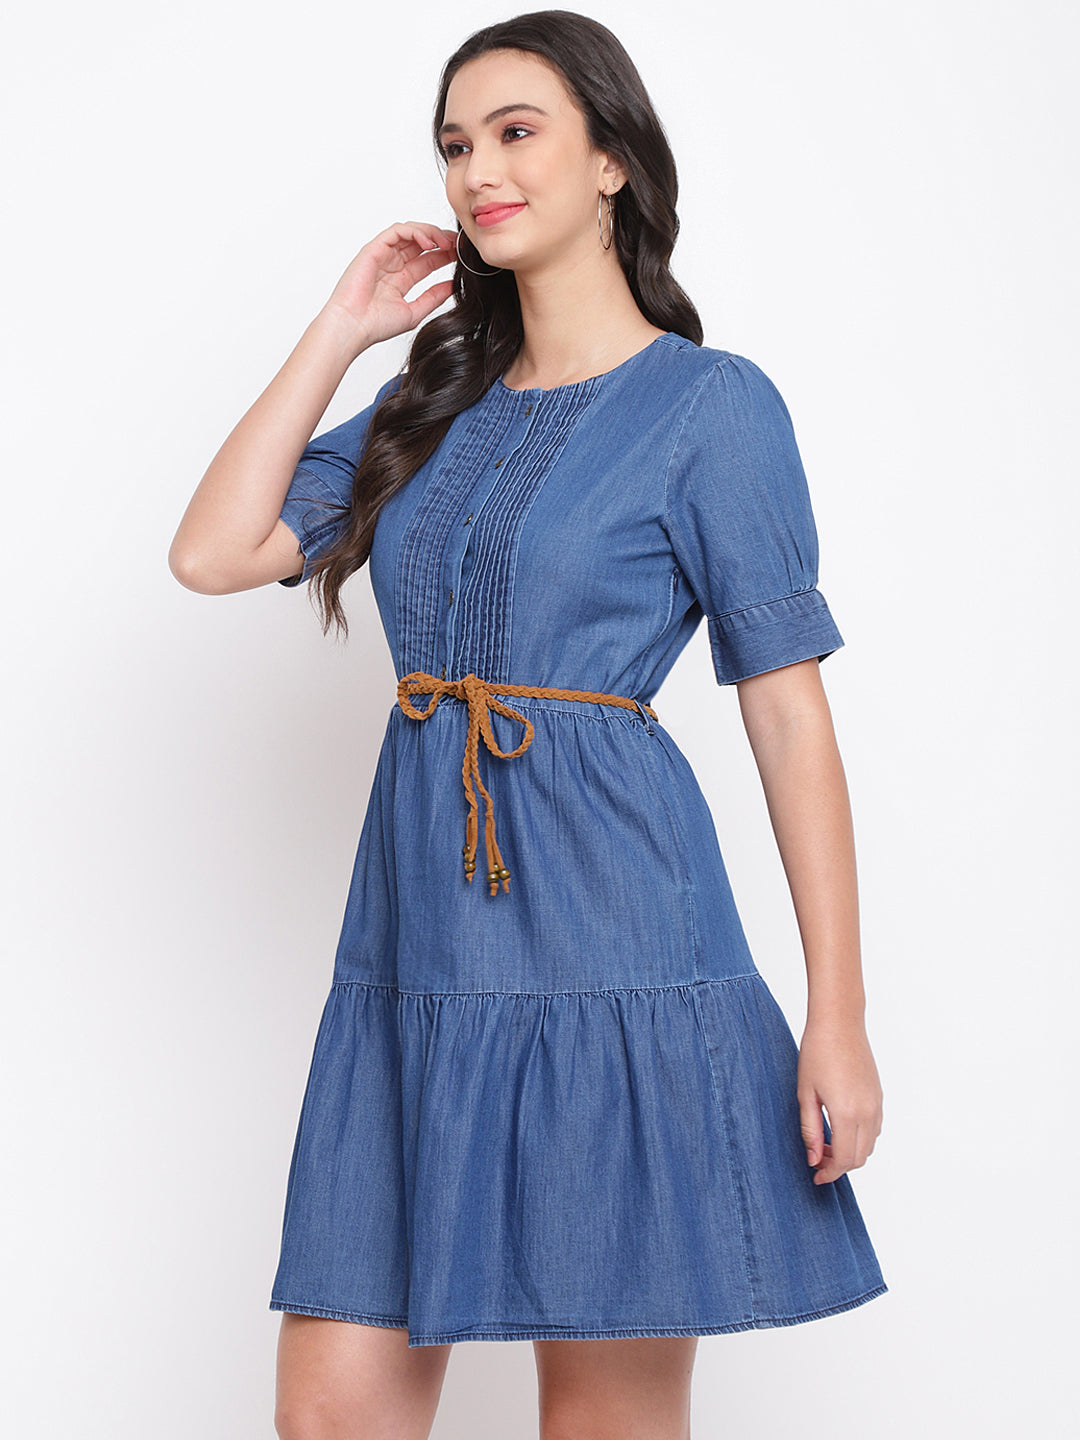 Pin by 𝒫 𝓇 𝒾 𝓃 𝒸 𝓎 🦋 on casual frock | Simple frocks, Simple frock  design, Long frock designs